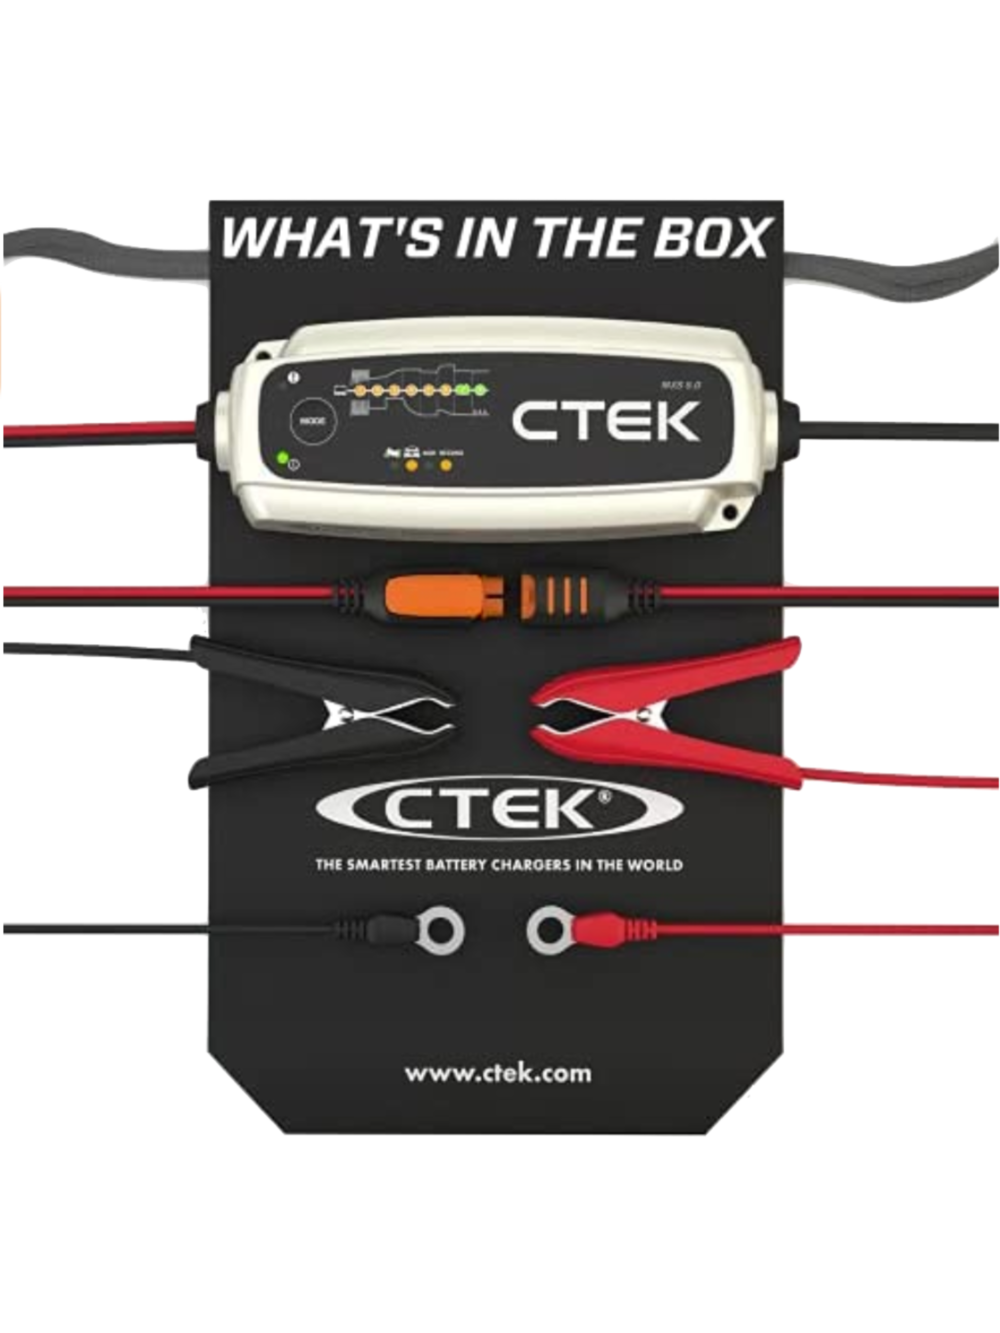 Cetec MXS 5.0 battery charger